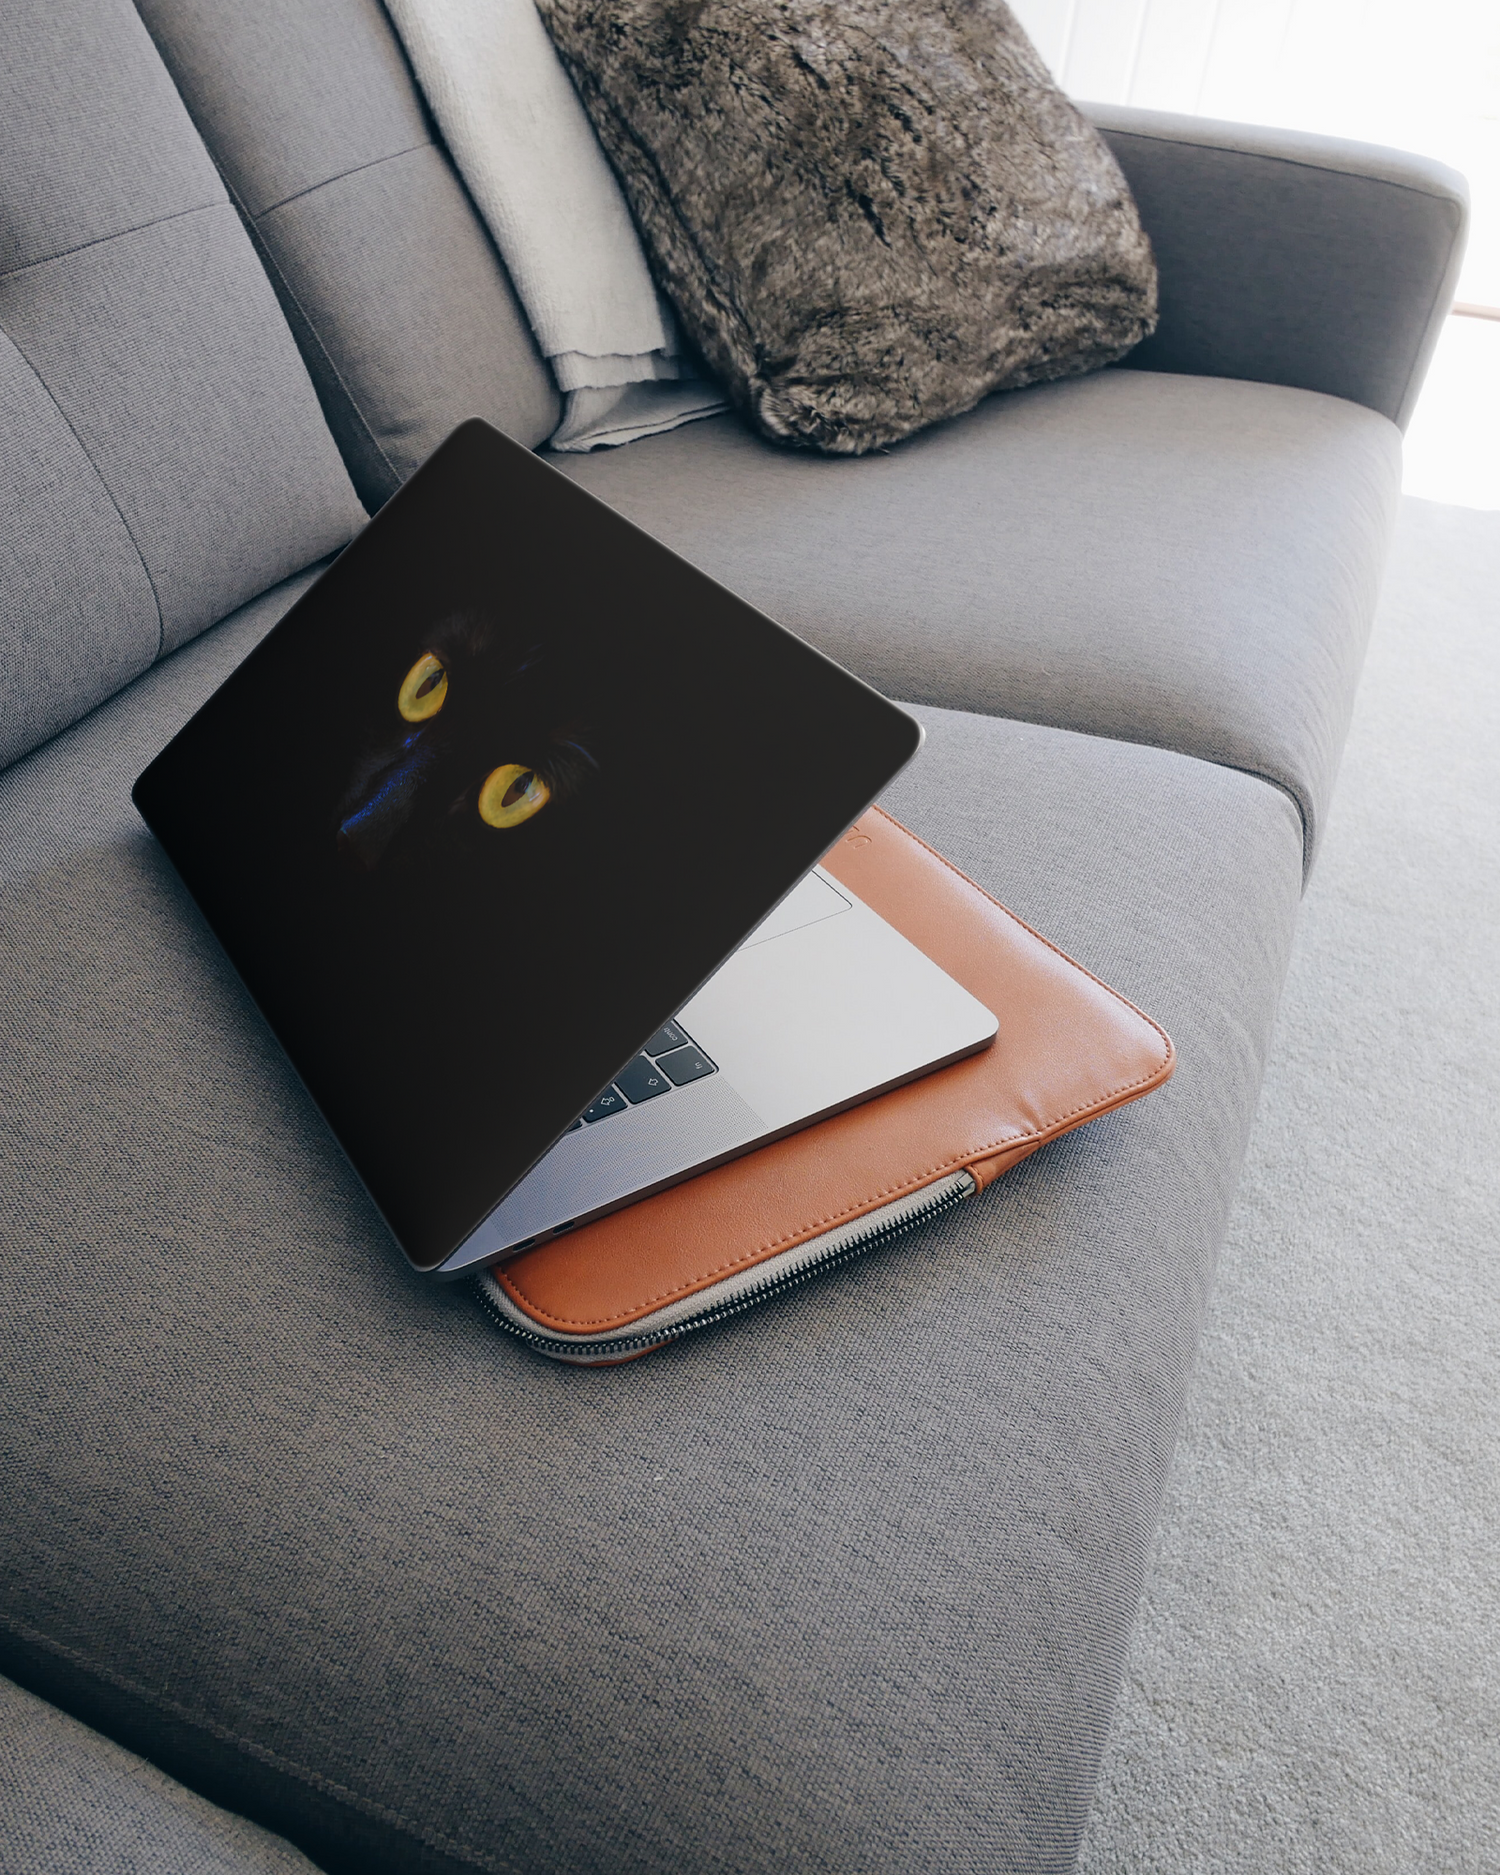 Black Cat Laptop Skin for 15 inch Apple MacBooks on a couch